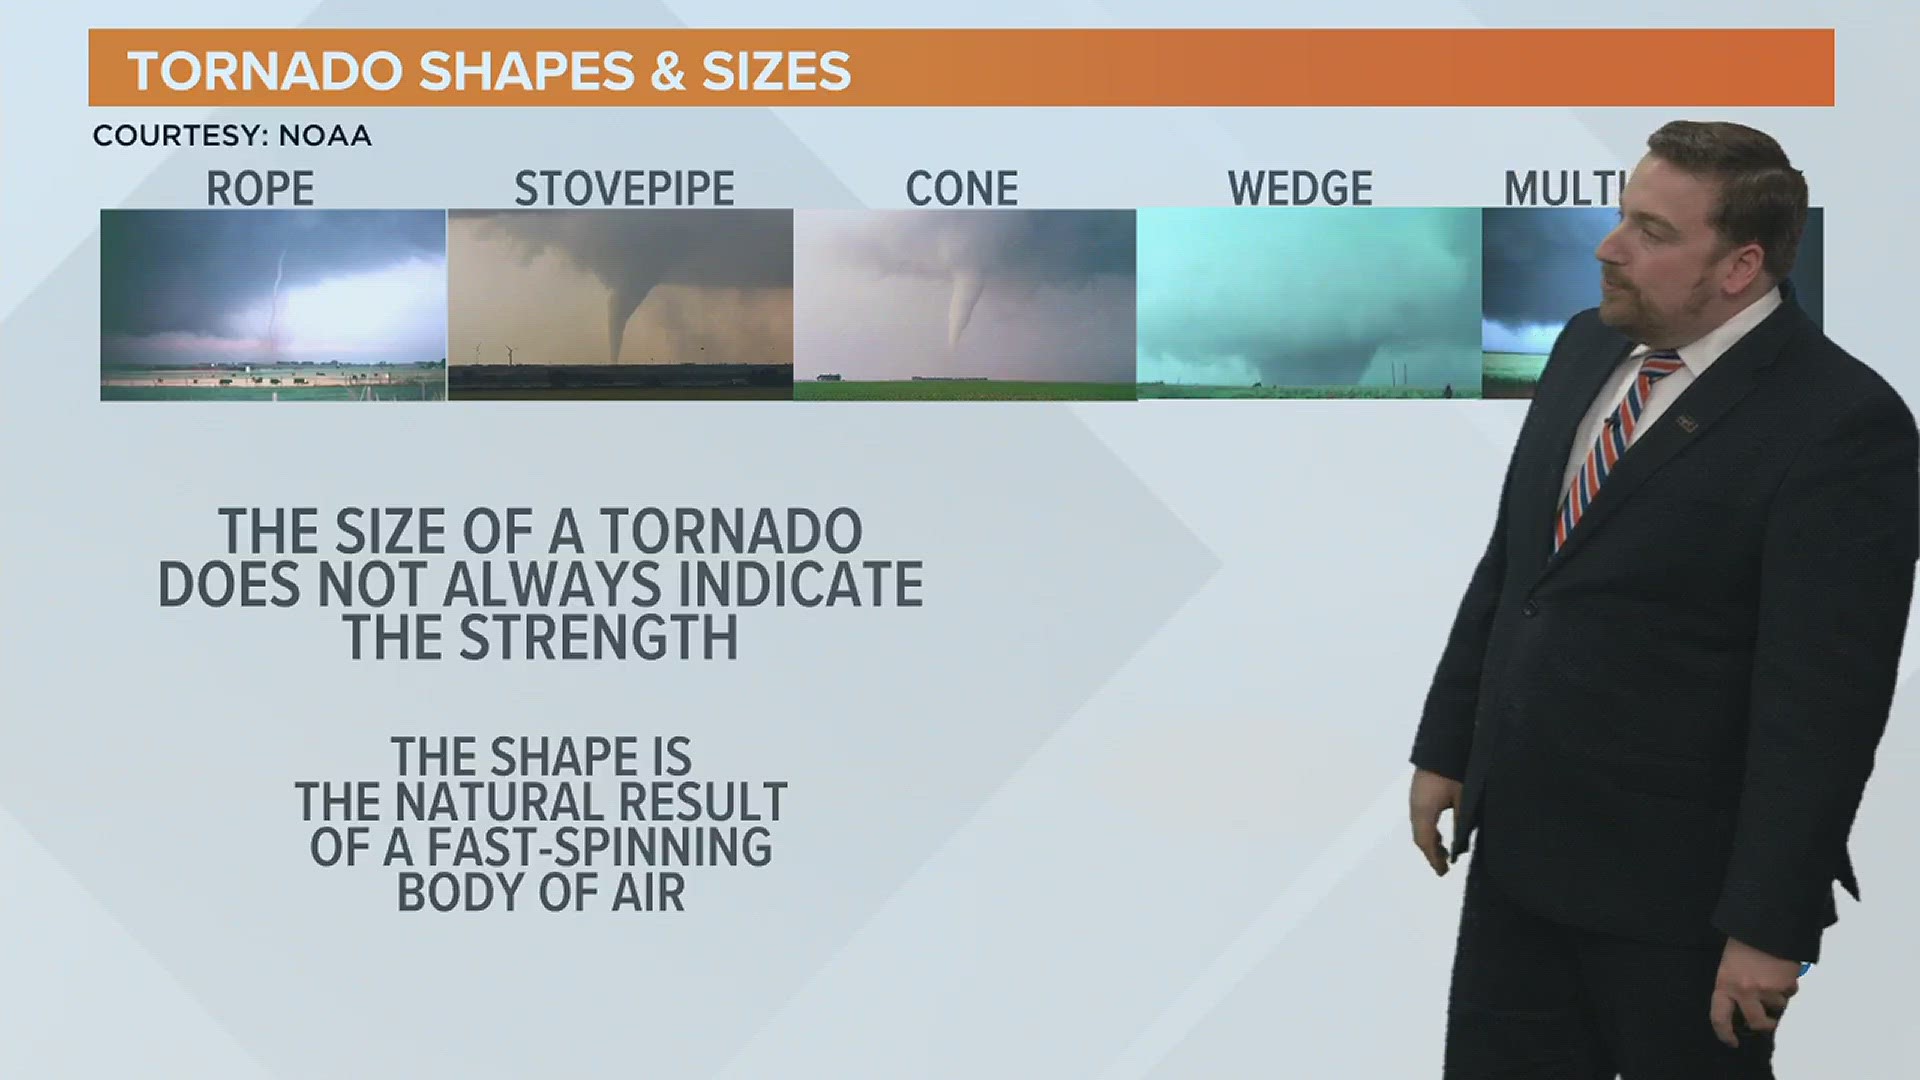 From stovepipes to wedges, these are the factors that influence a tornadoes shape and size.